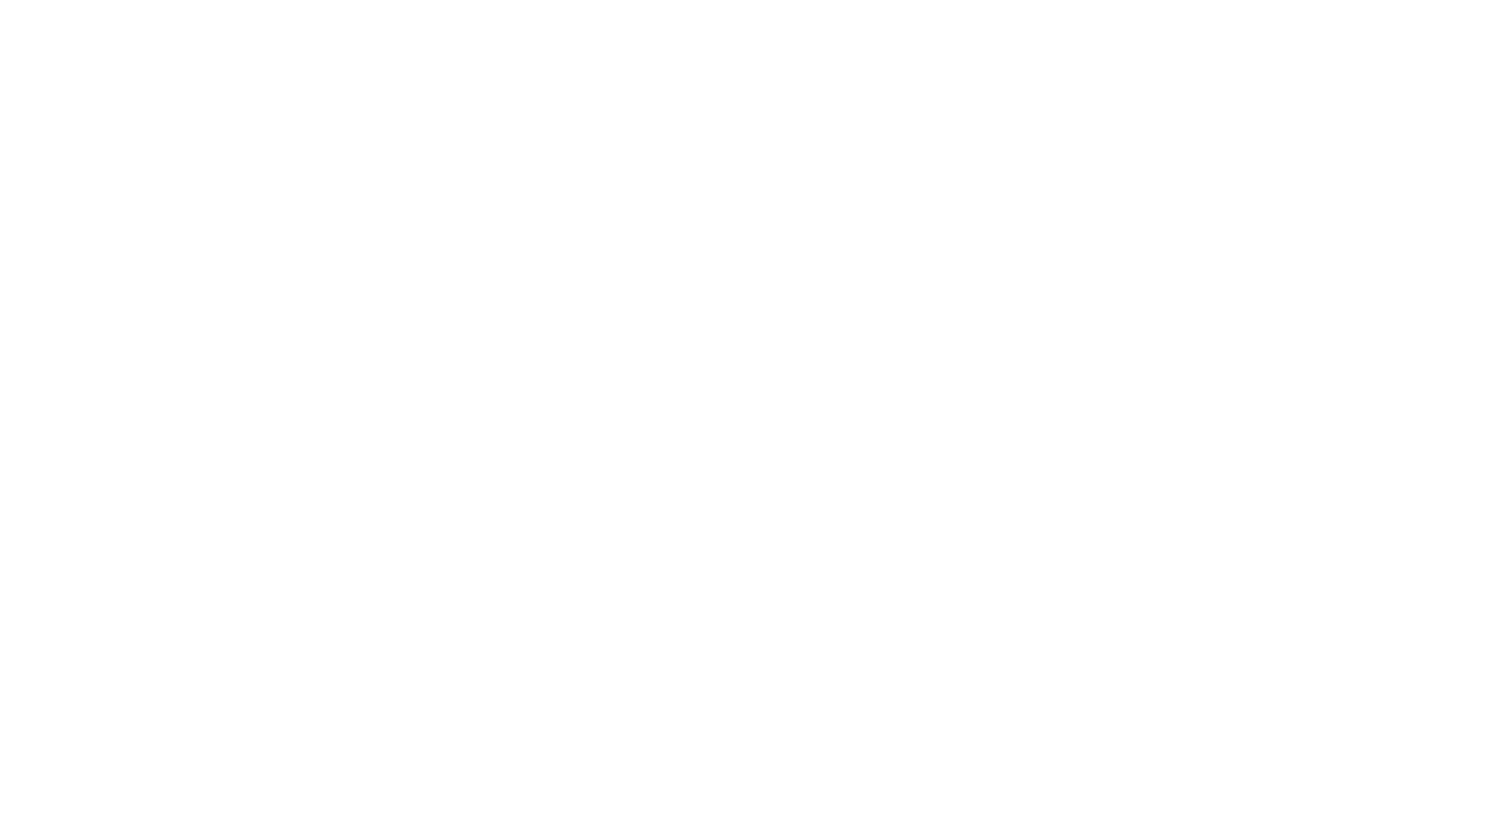 Visible Alpha now a part of S&P Global Market Intelligence